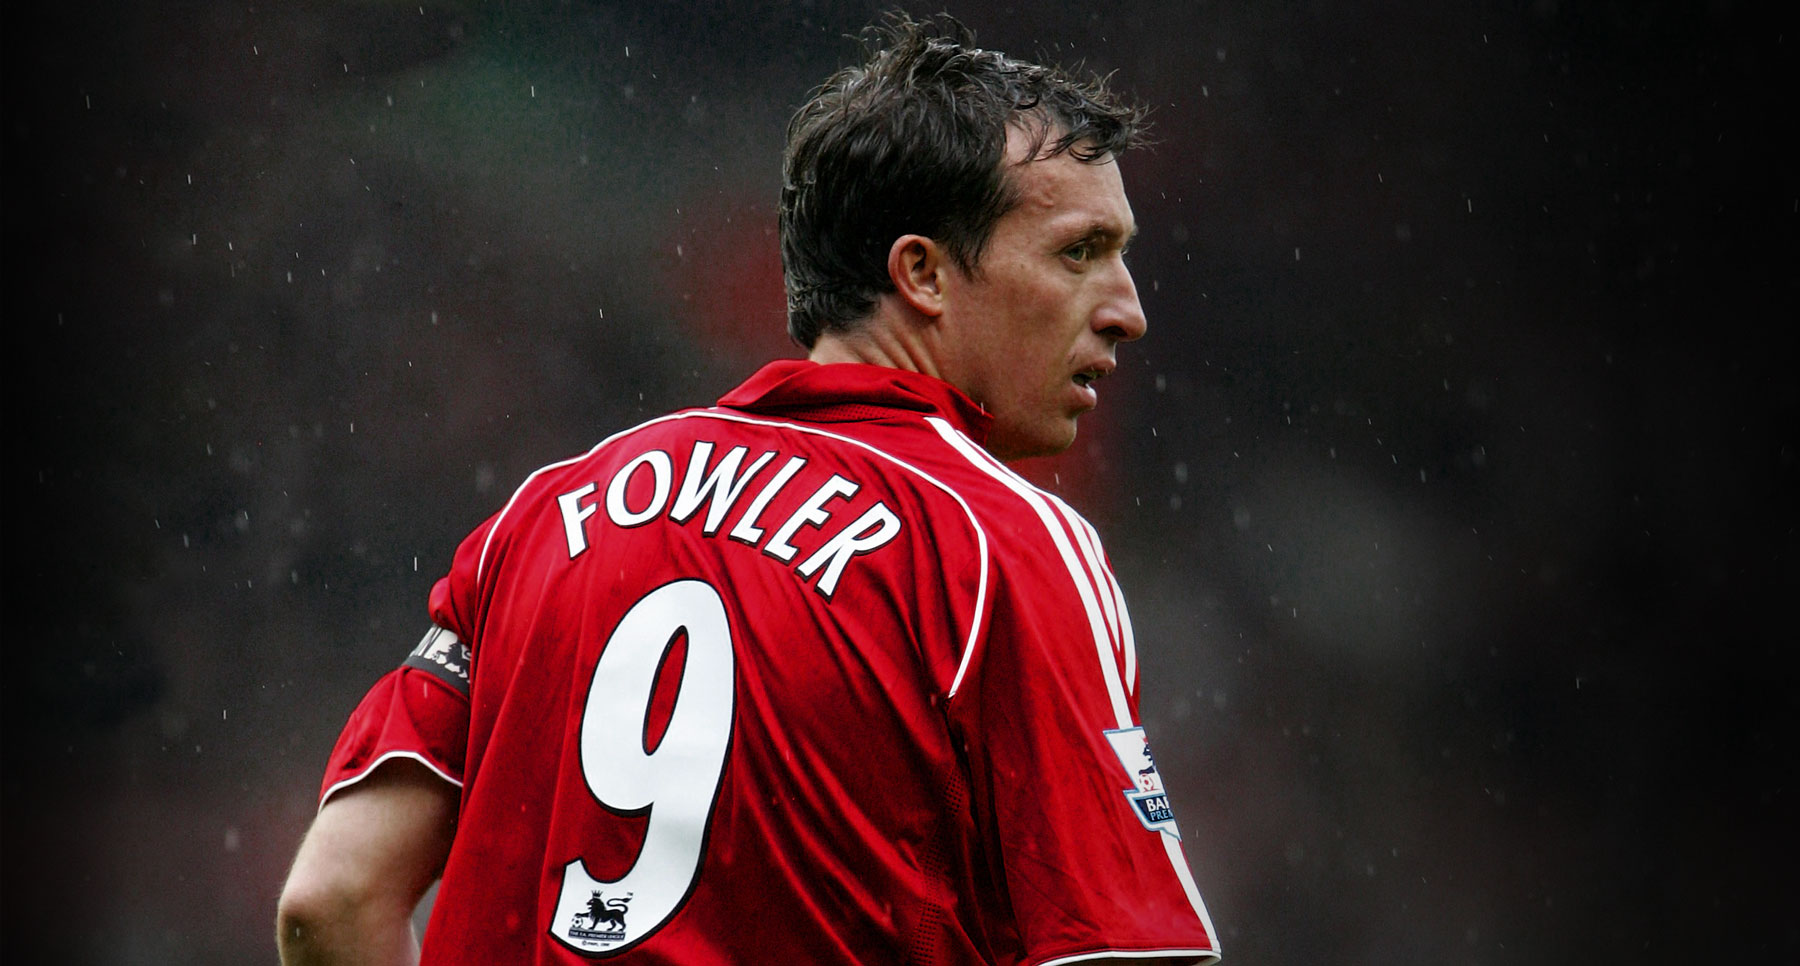 robbie fowler jersey number